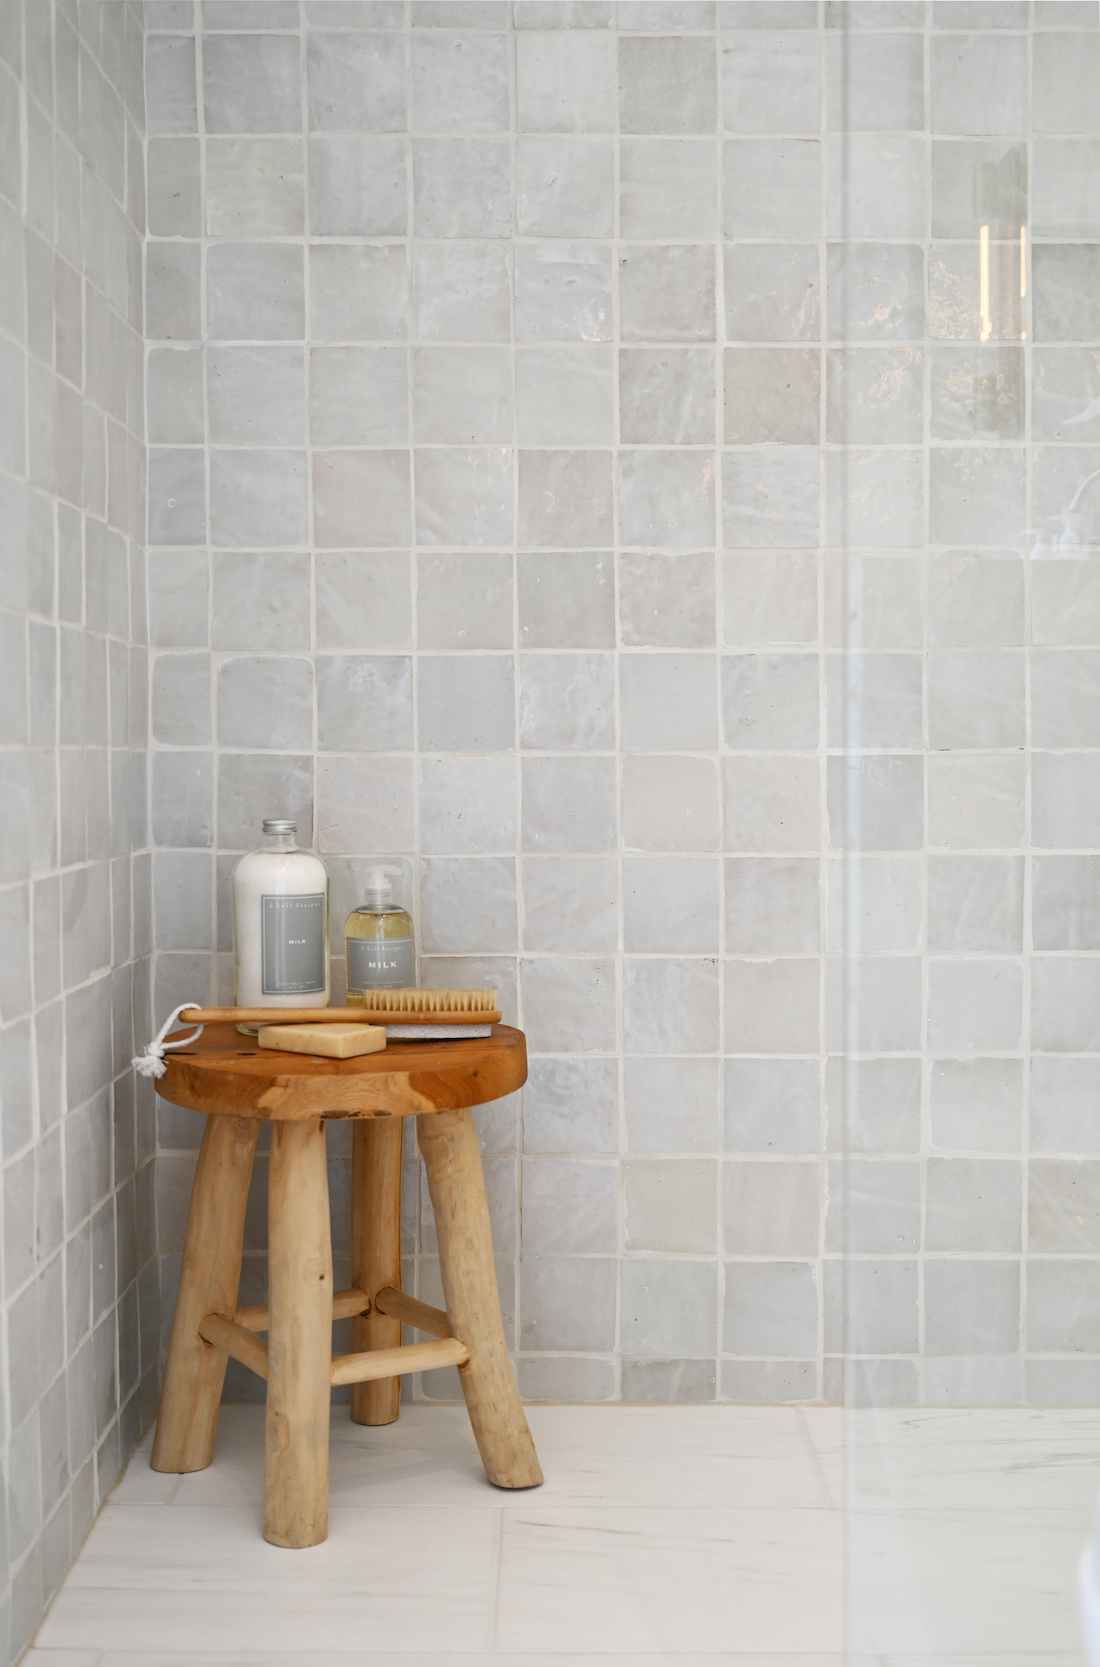 Gray square tiles in bathroom with wooden stool